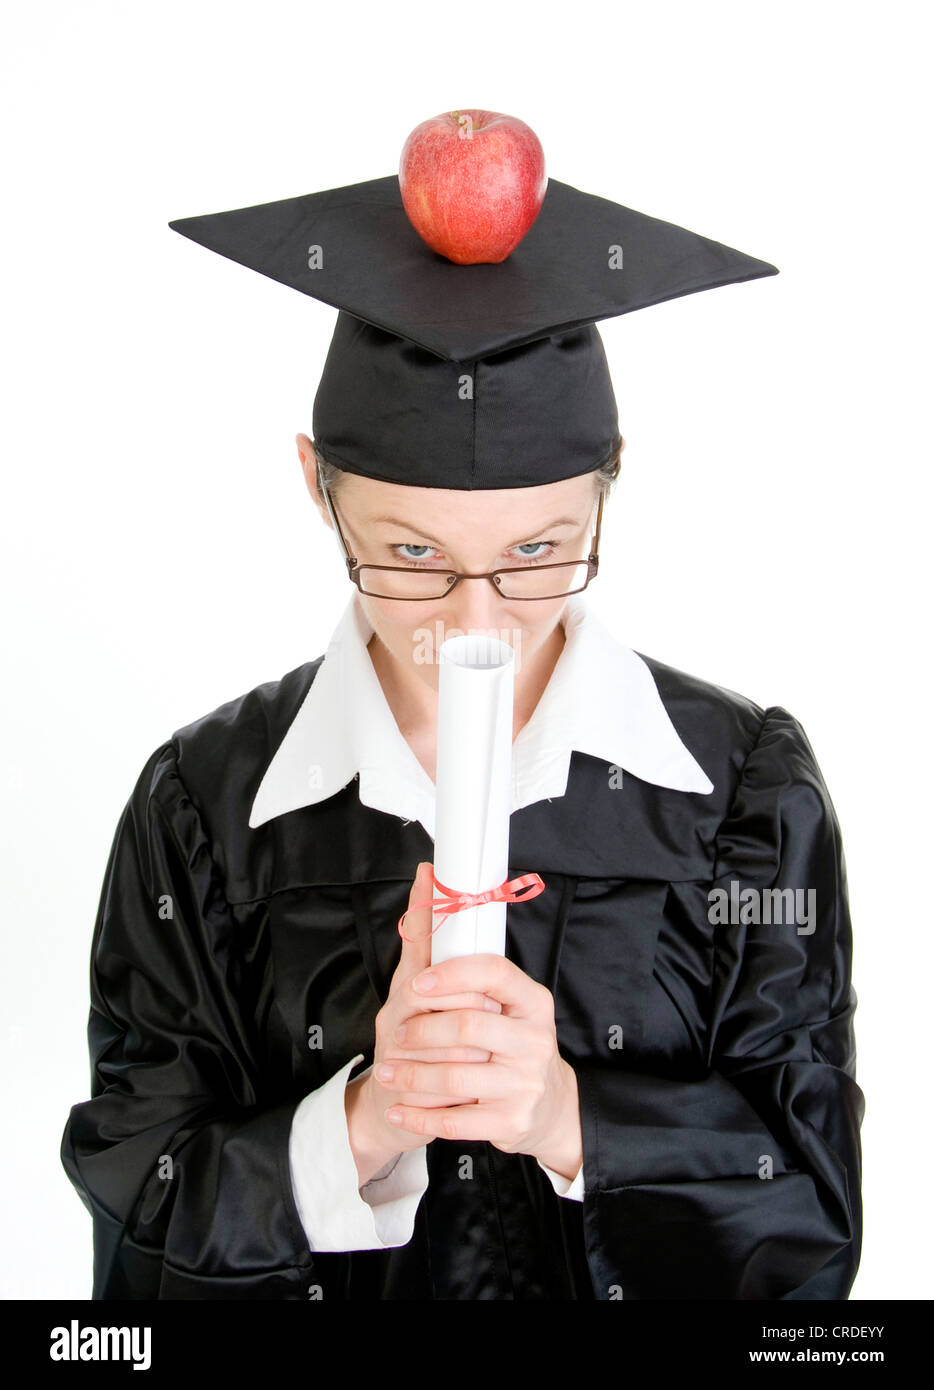 symbolic for brainfood, degree holder with apple Stock Photo